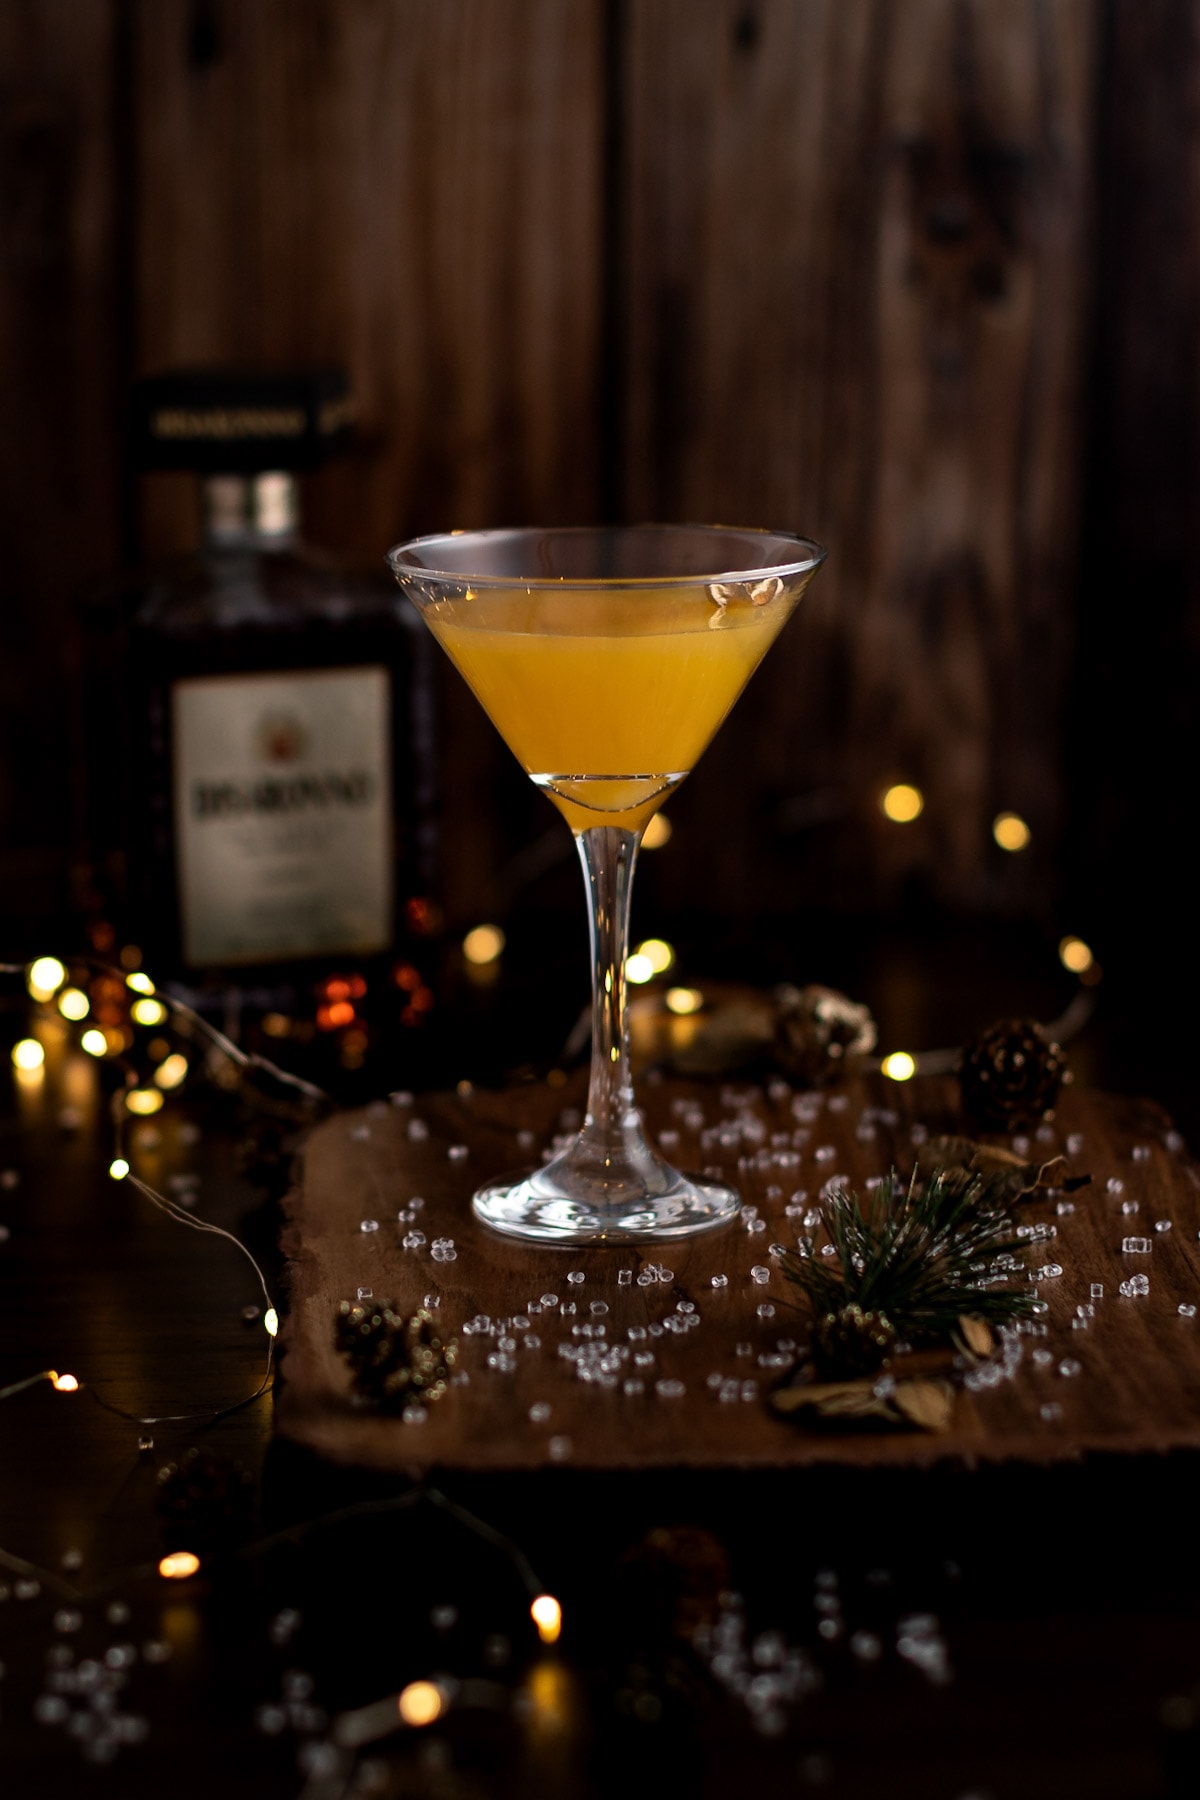 Peach amaretto martini on a wooden board, with fairy lights and a bottle of disaronno in the background.